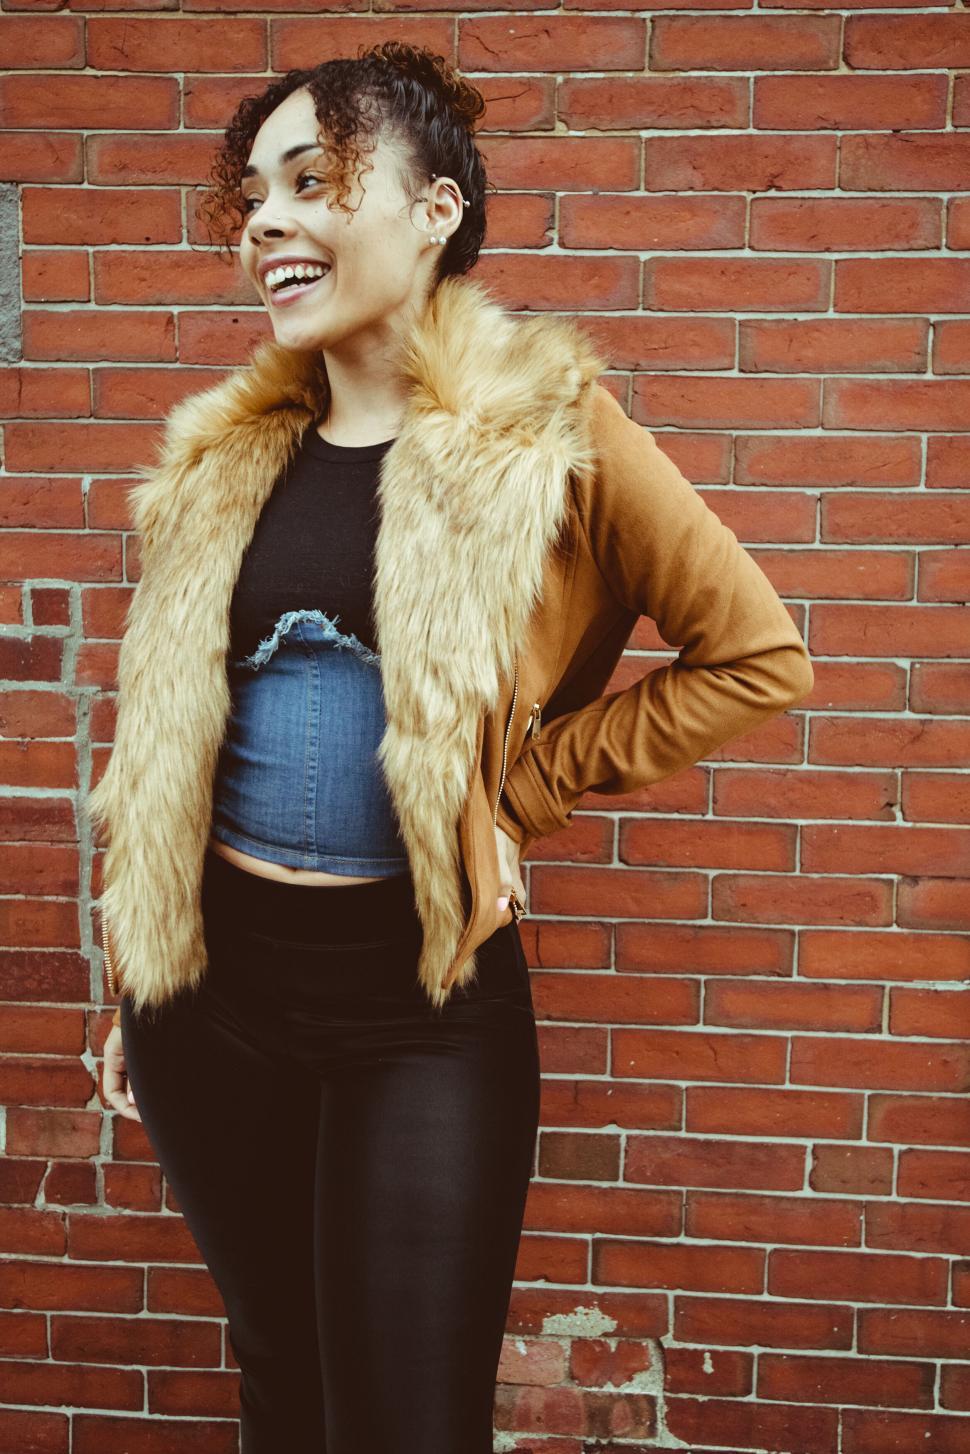 Free Image of Smiling woman with a trendy jacket 